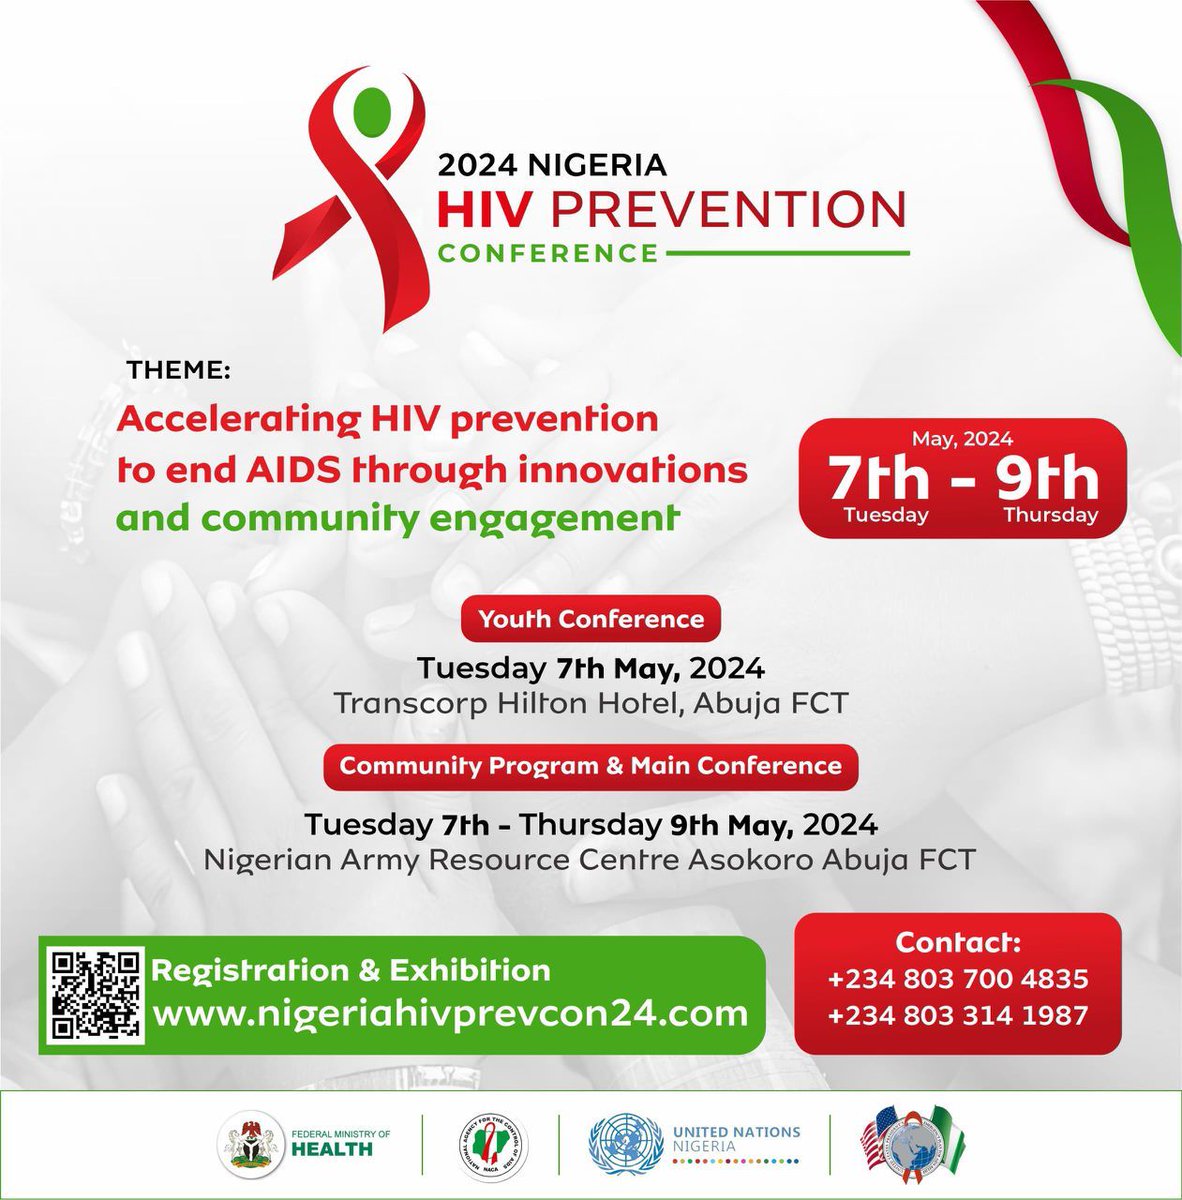 You too can be part of the change we need, join us at the Nigeria HIV prevention conference 2024  7th - 9th May, 2024.

Register here: nigeriahivprevcon24.com/registration/

#AYP4Change
#NHIVYPC2024